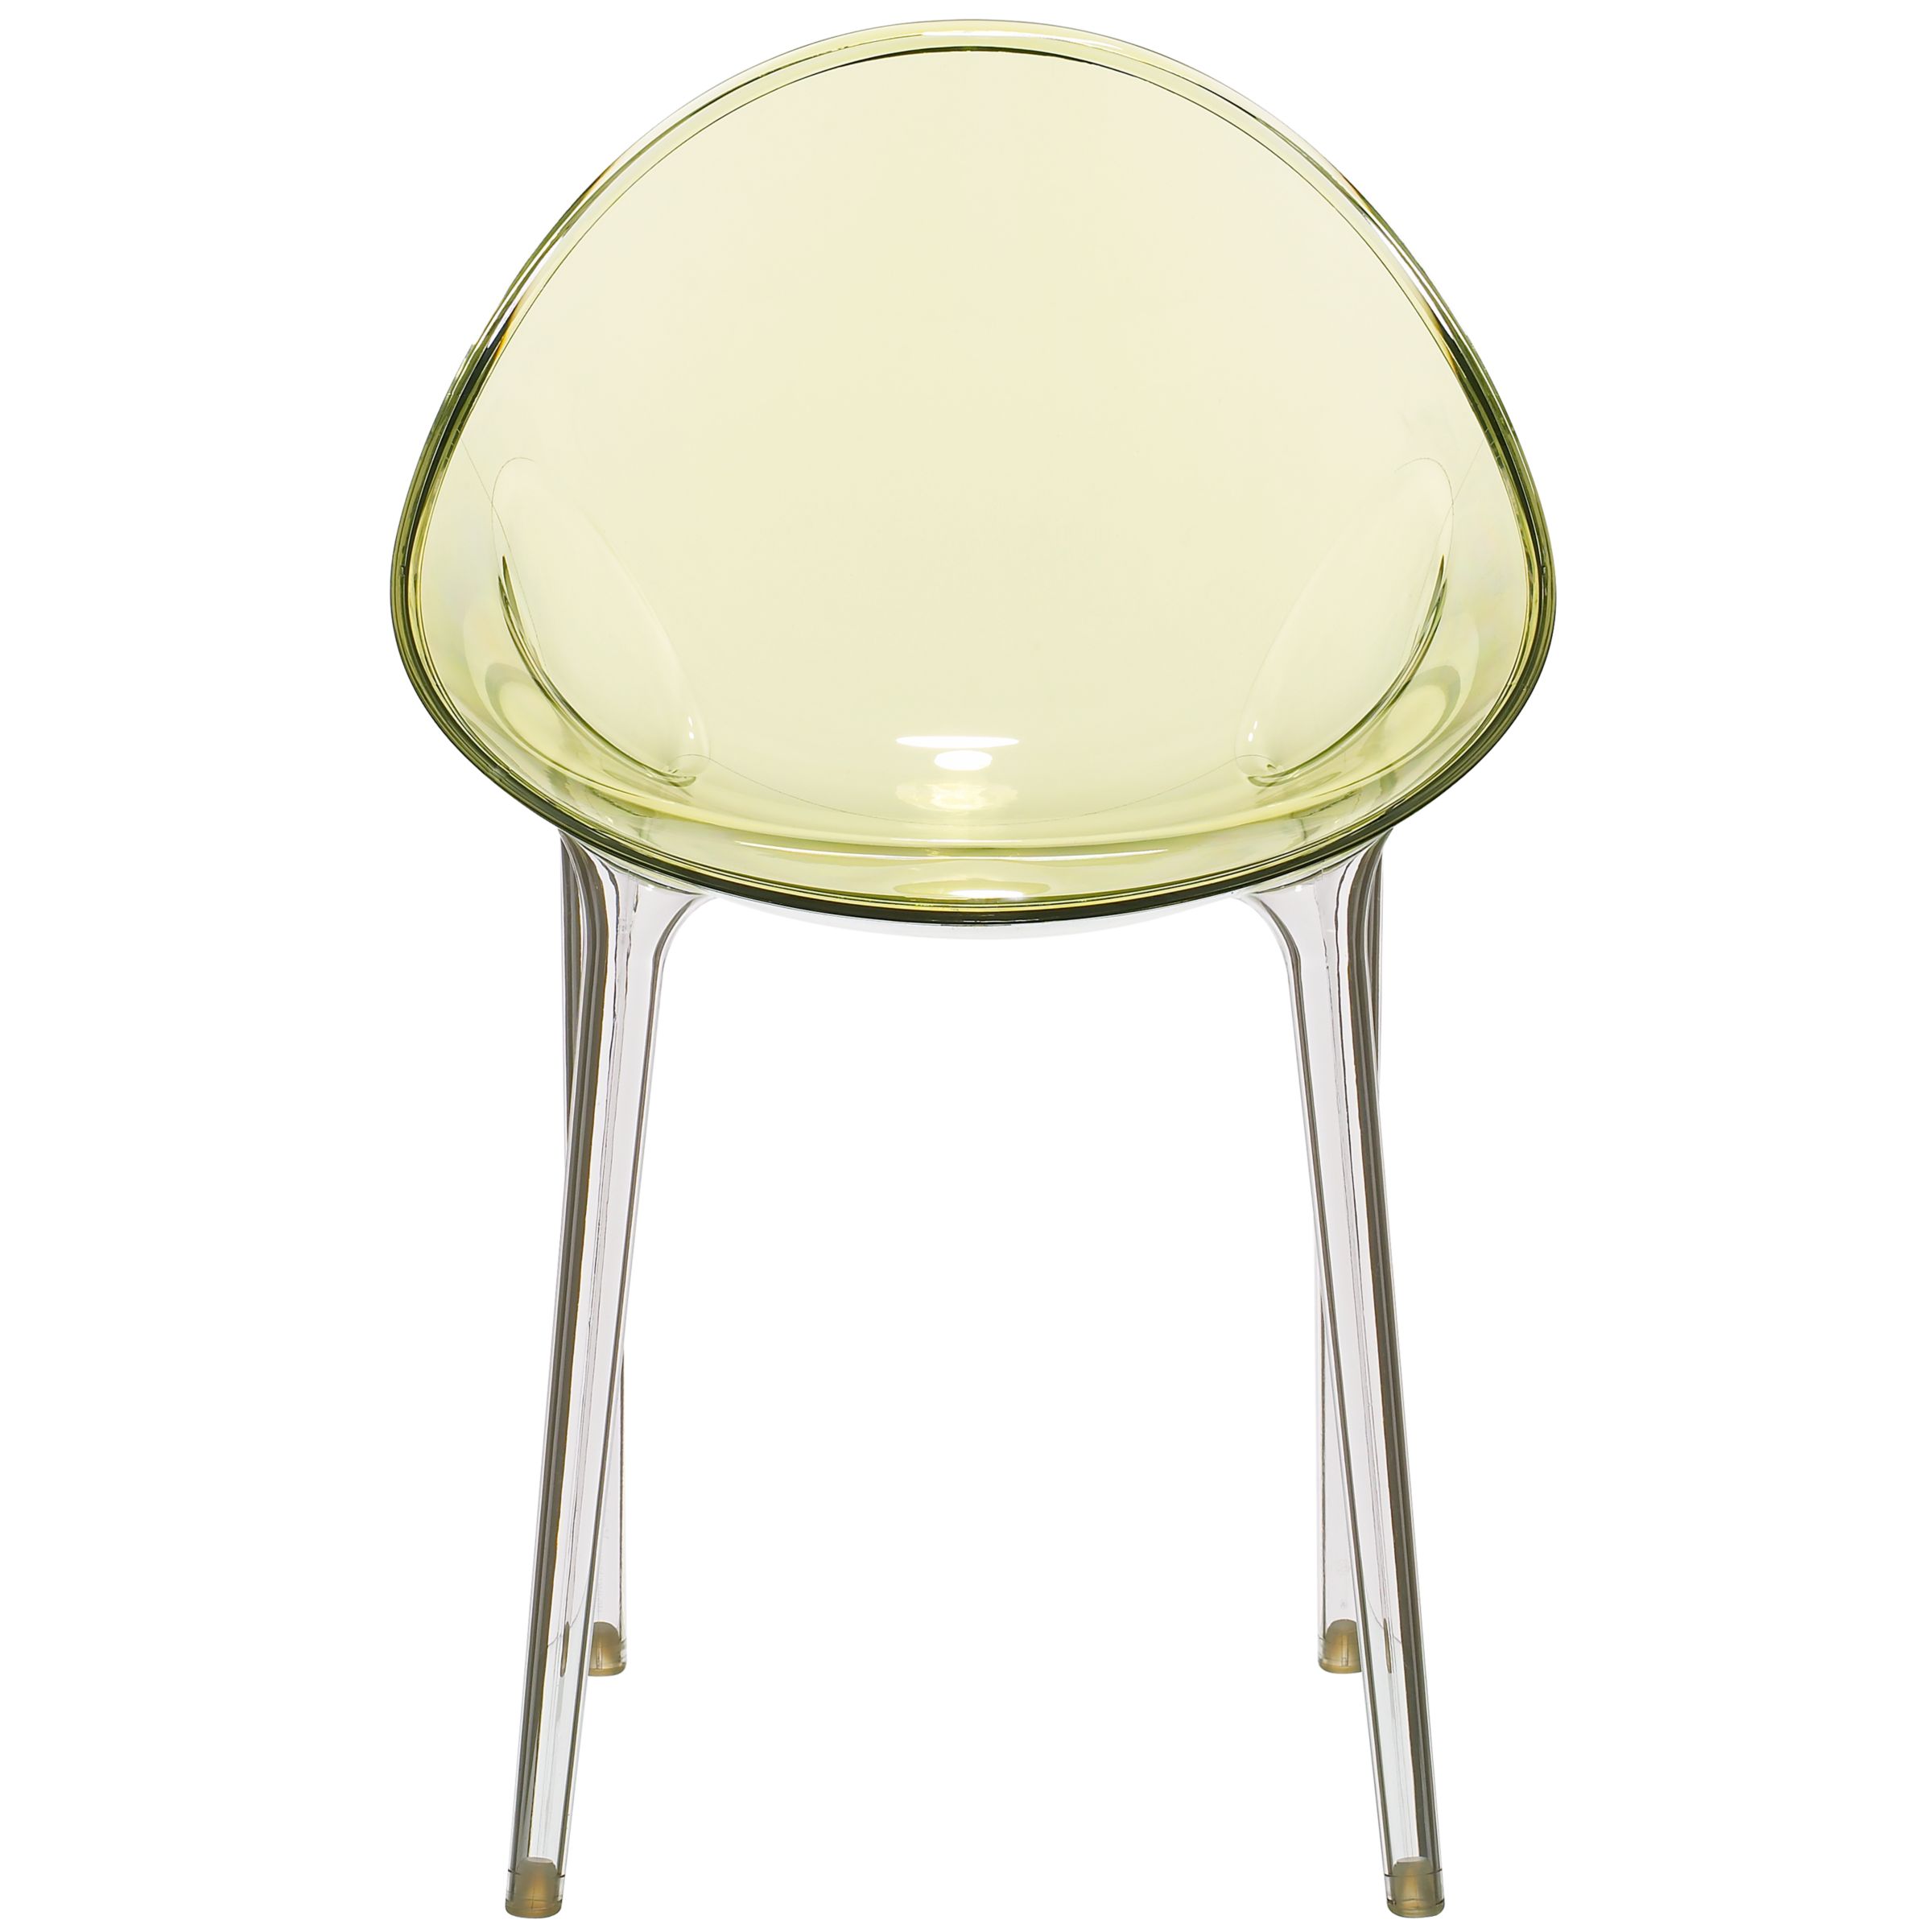 Philippe Starck for Kartell Mr. Impossible